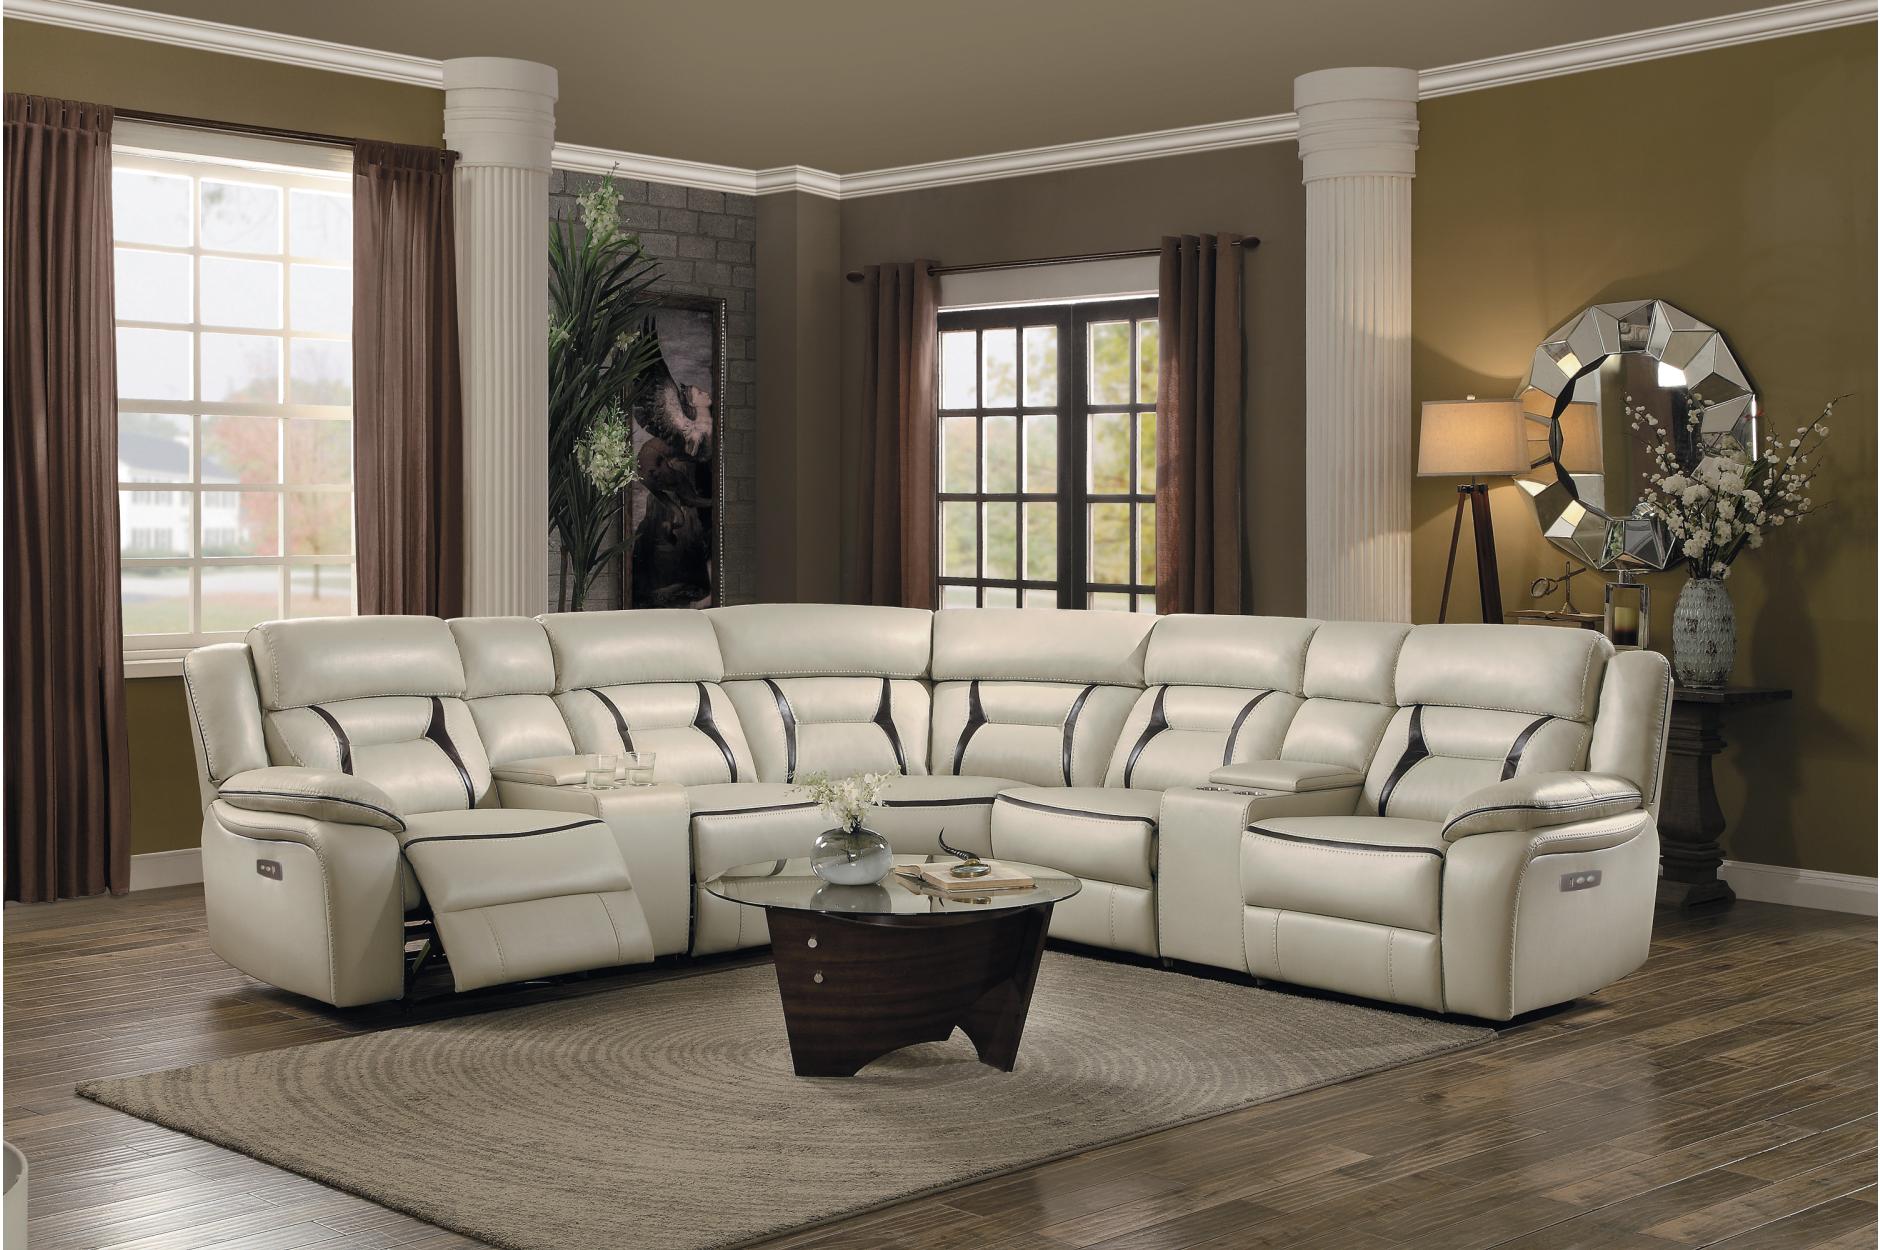 Homelegance® Amite 7 Pieces Sectional Set